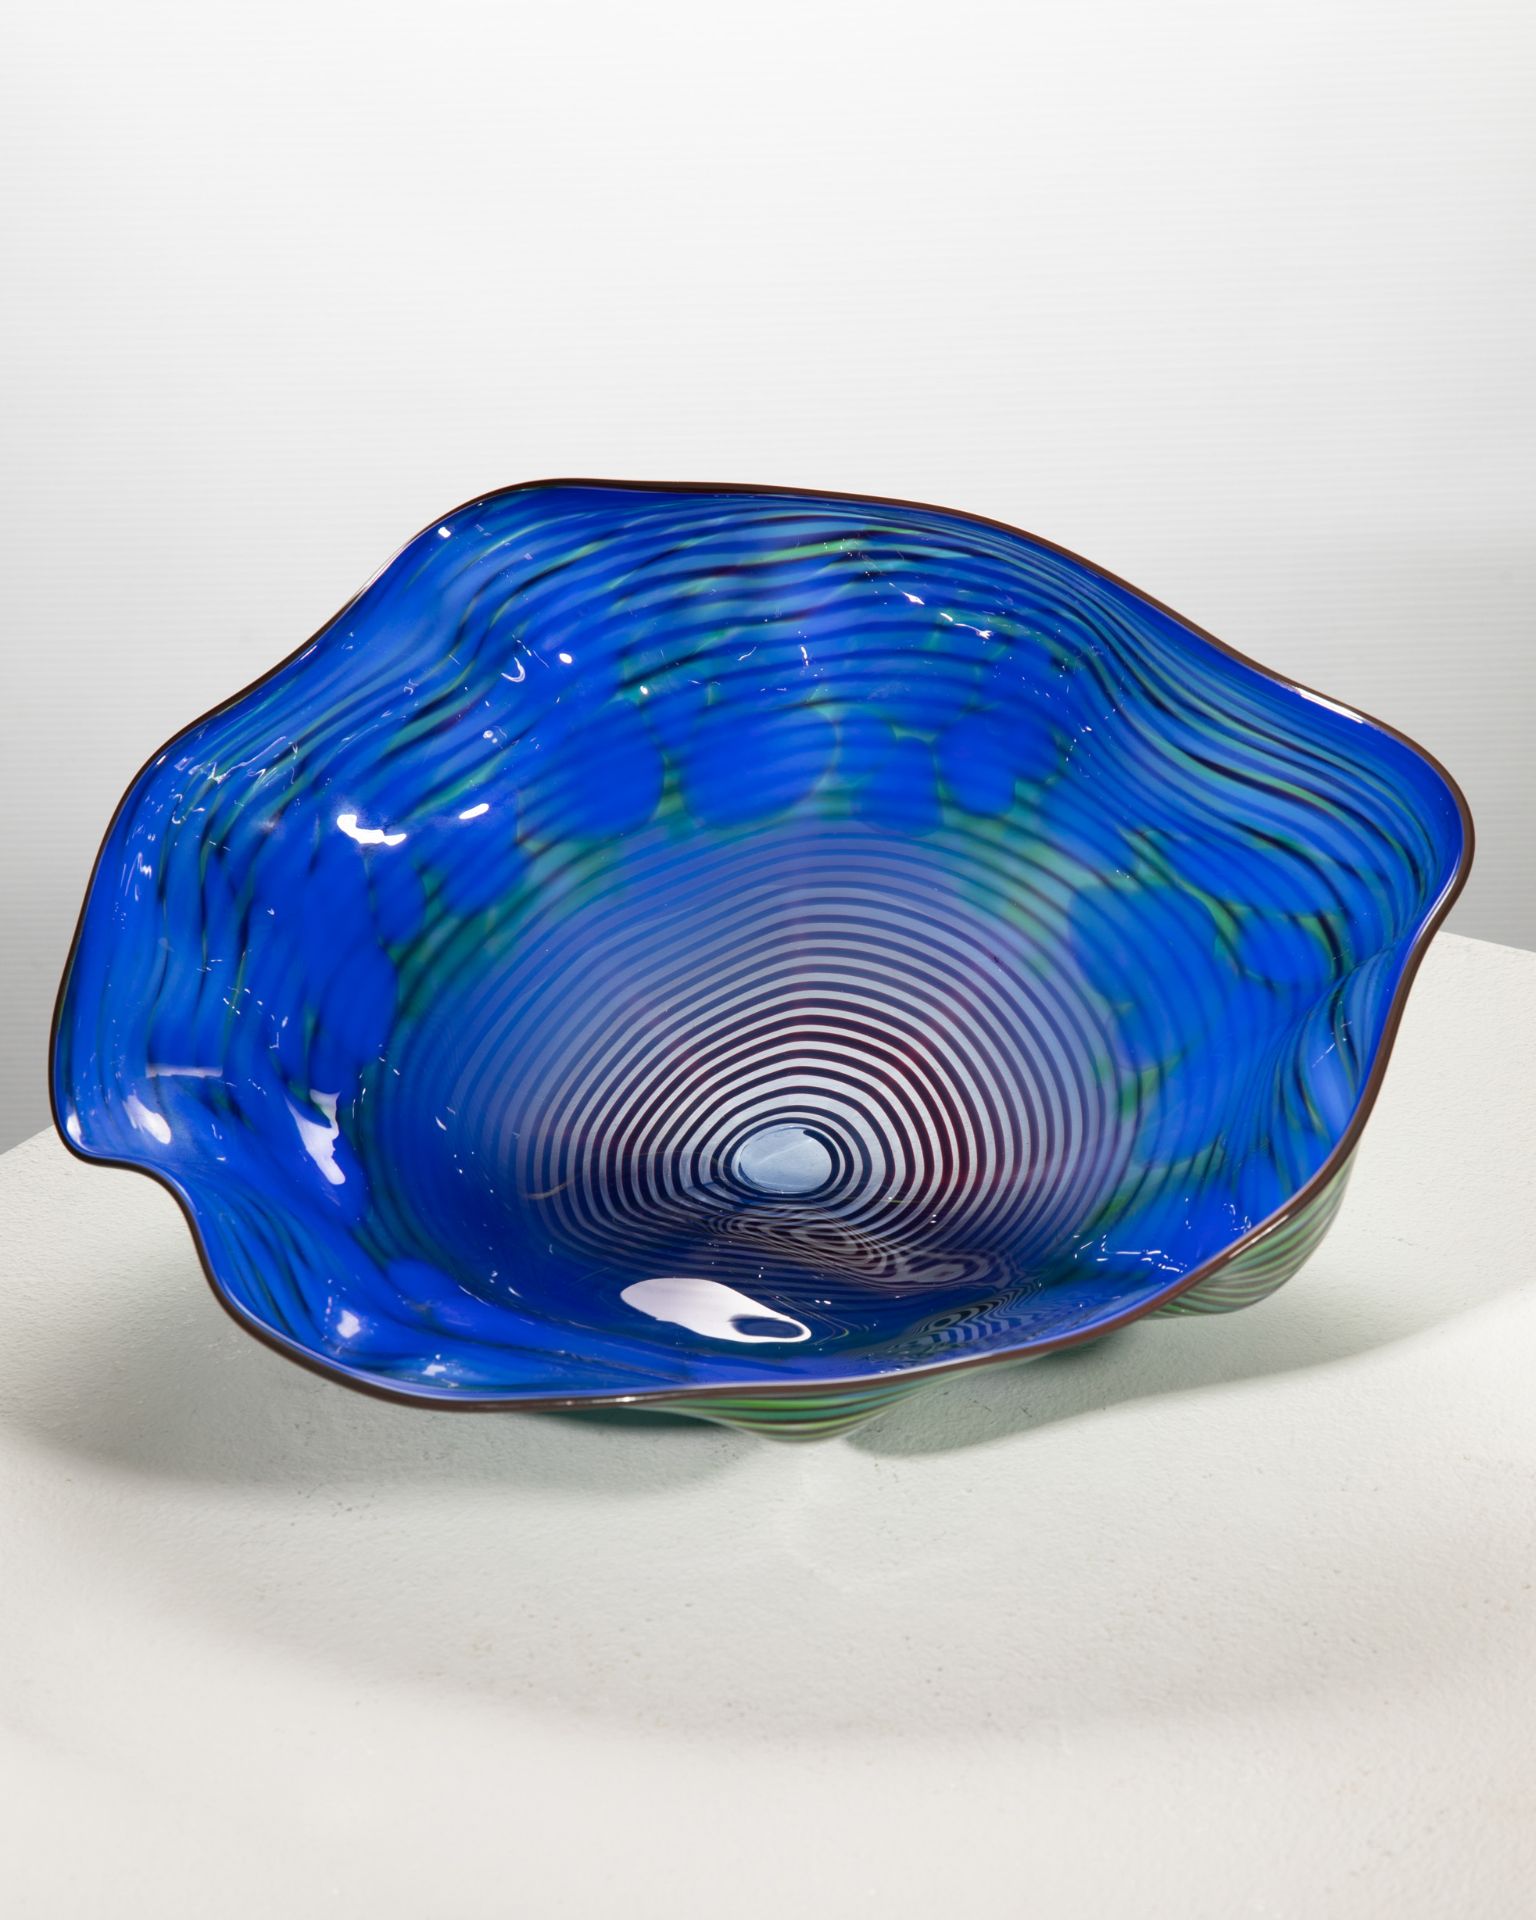 Dale Chihuly, 3 seaforms piece sculptural glasforms - Image 7 of 17